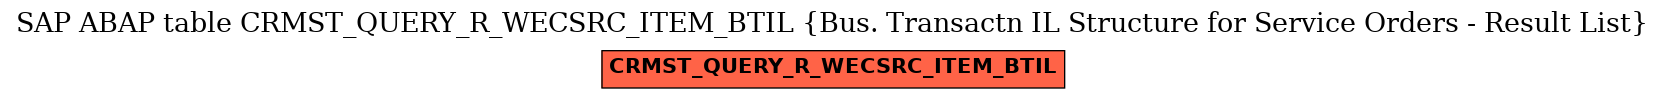 E-R Diagram for table CRMST_QUERY_R_WECSRC_ITEM_BTIL (Bus. Transactn IL Structure for Service Orders - Result List)